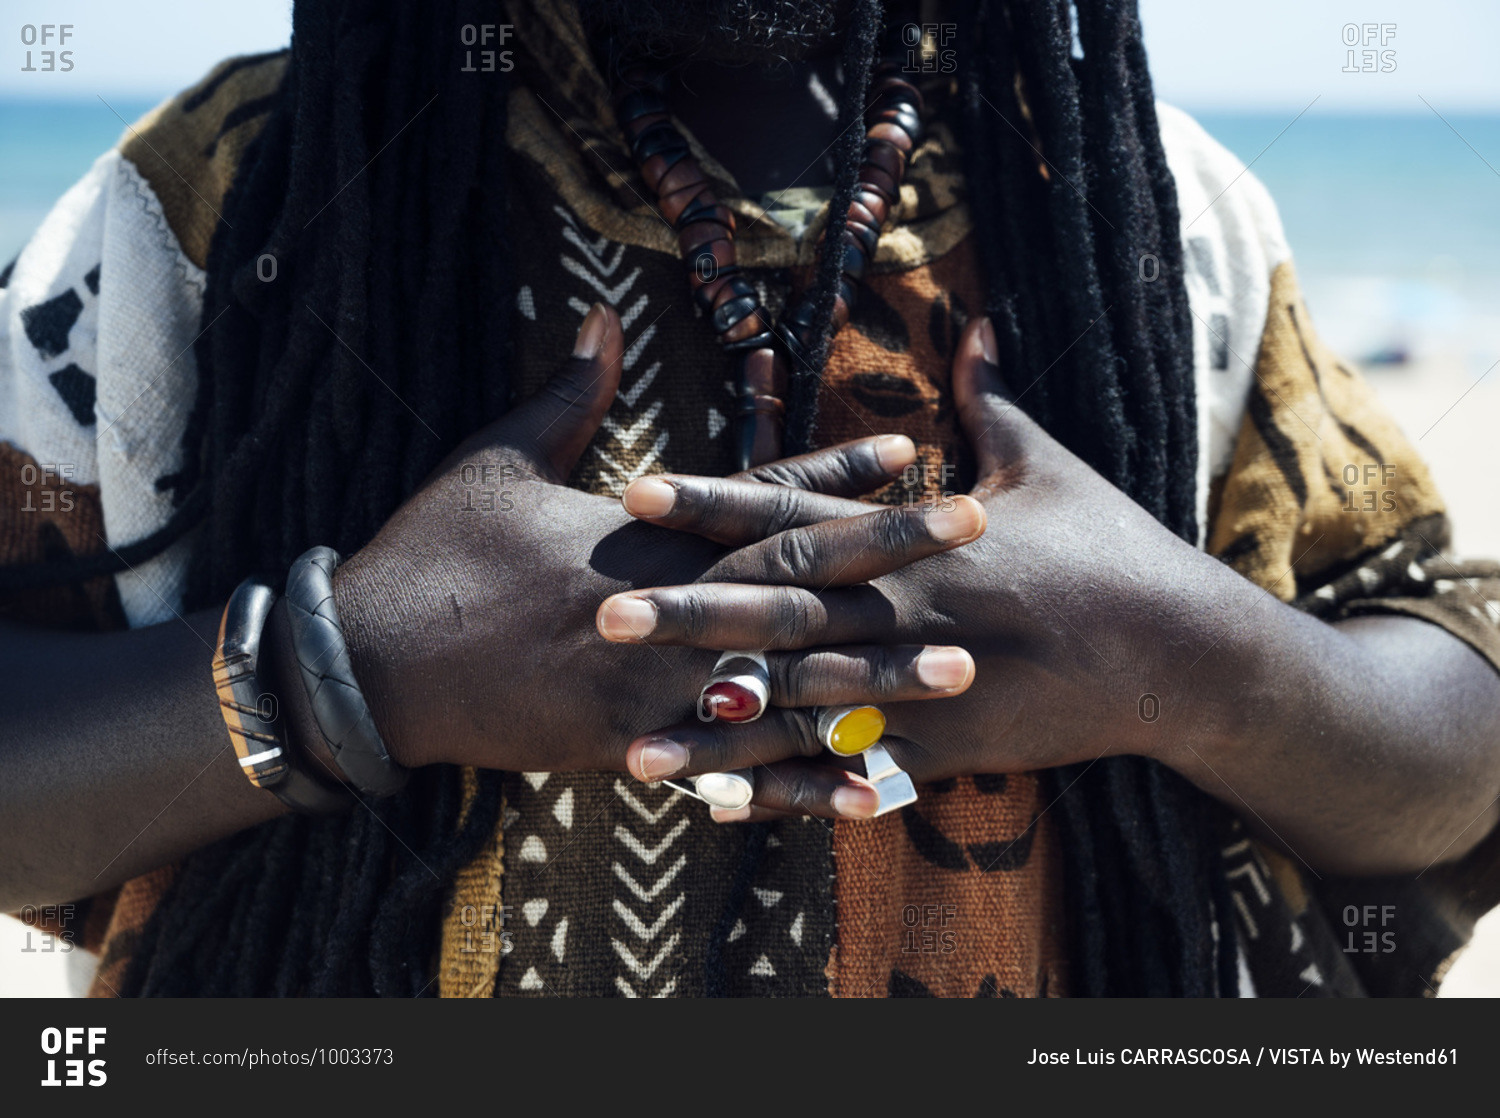 Hands with jeweled rings of man with dreadlocks